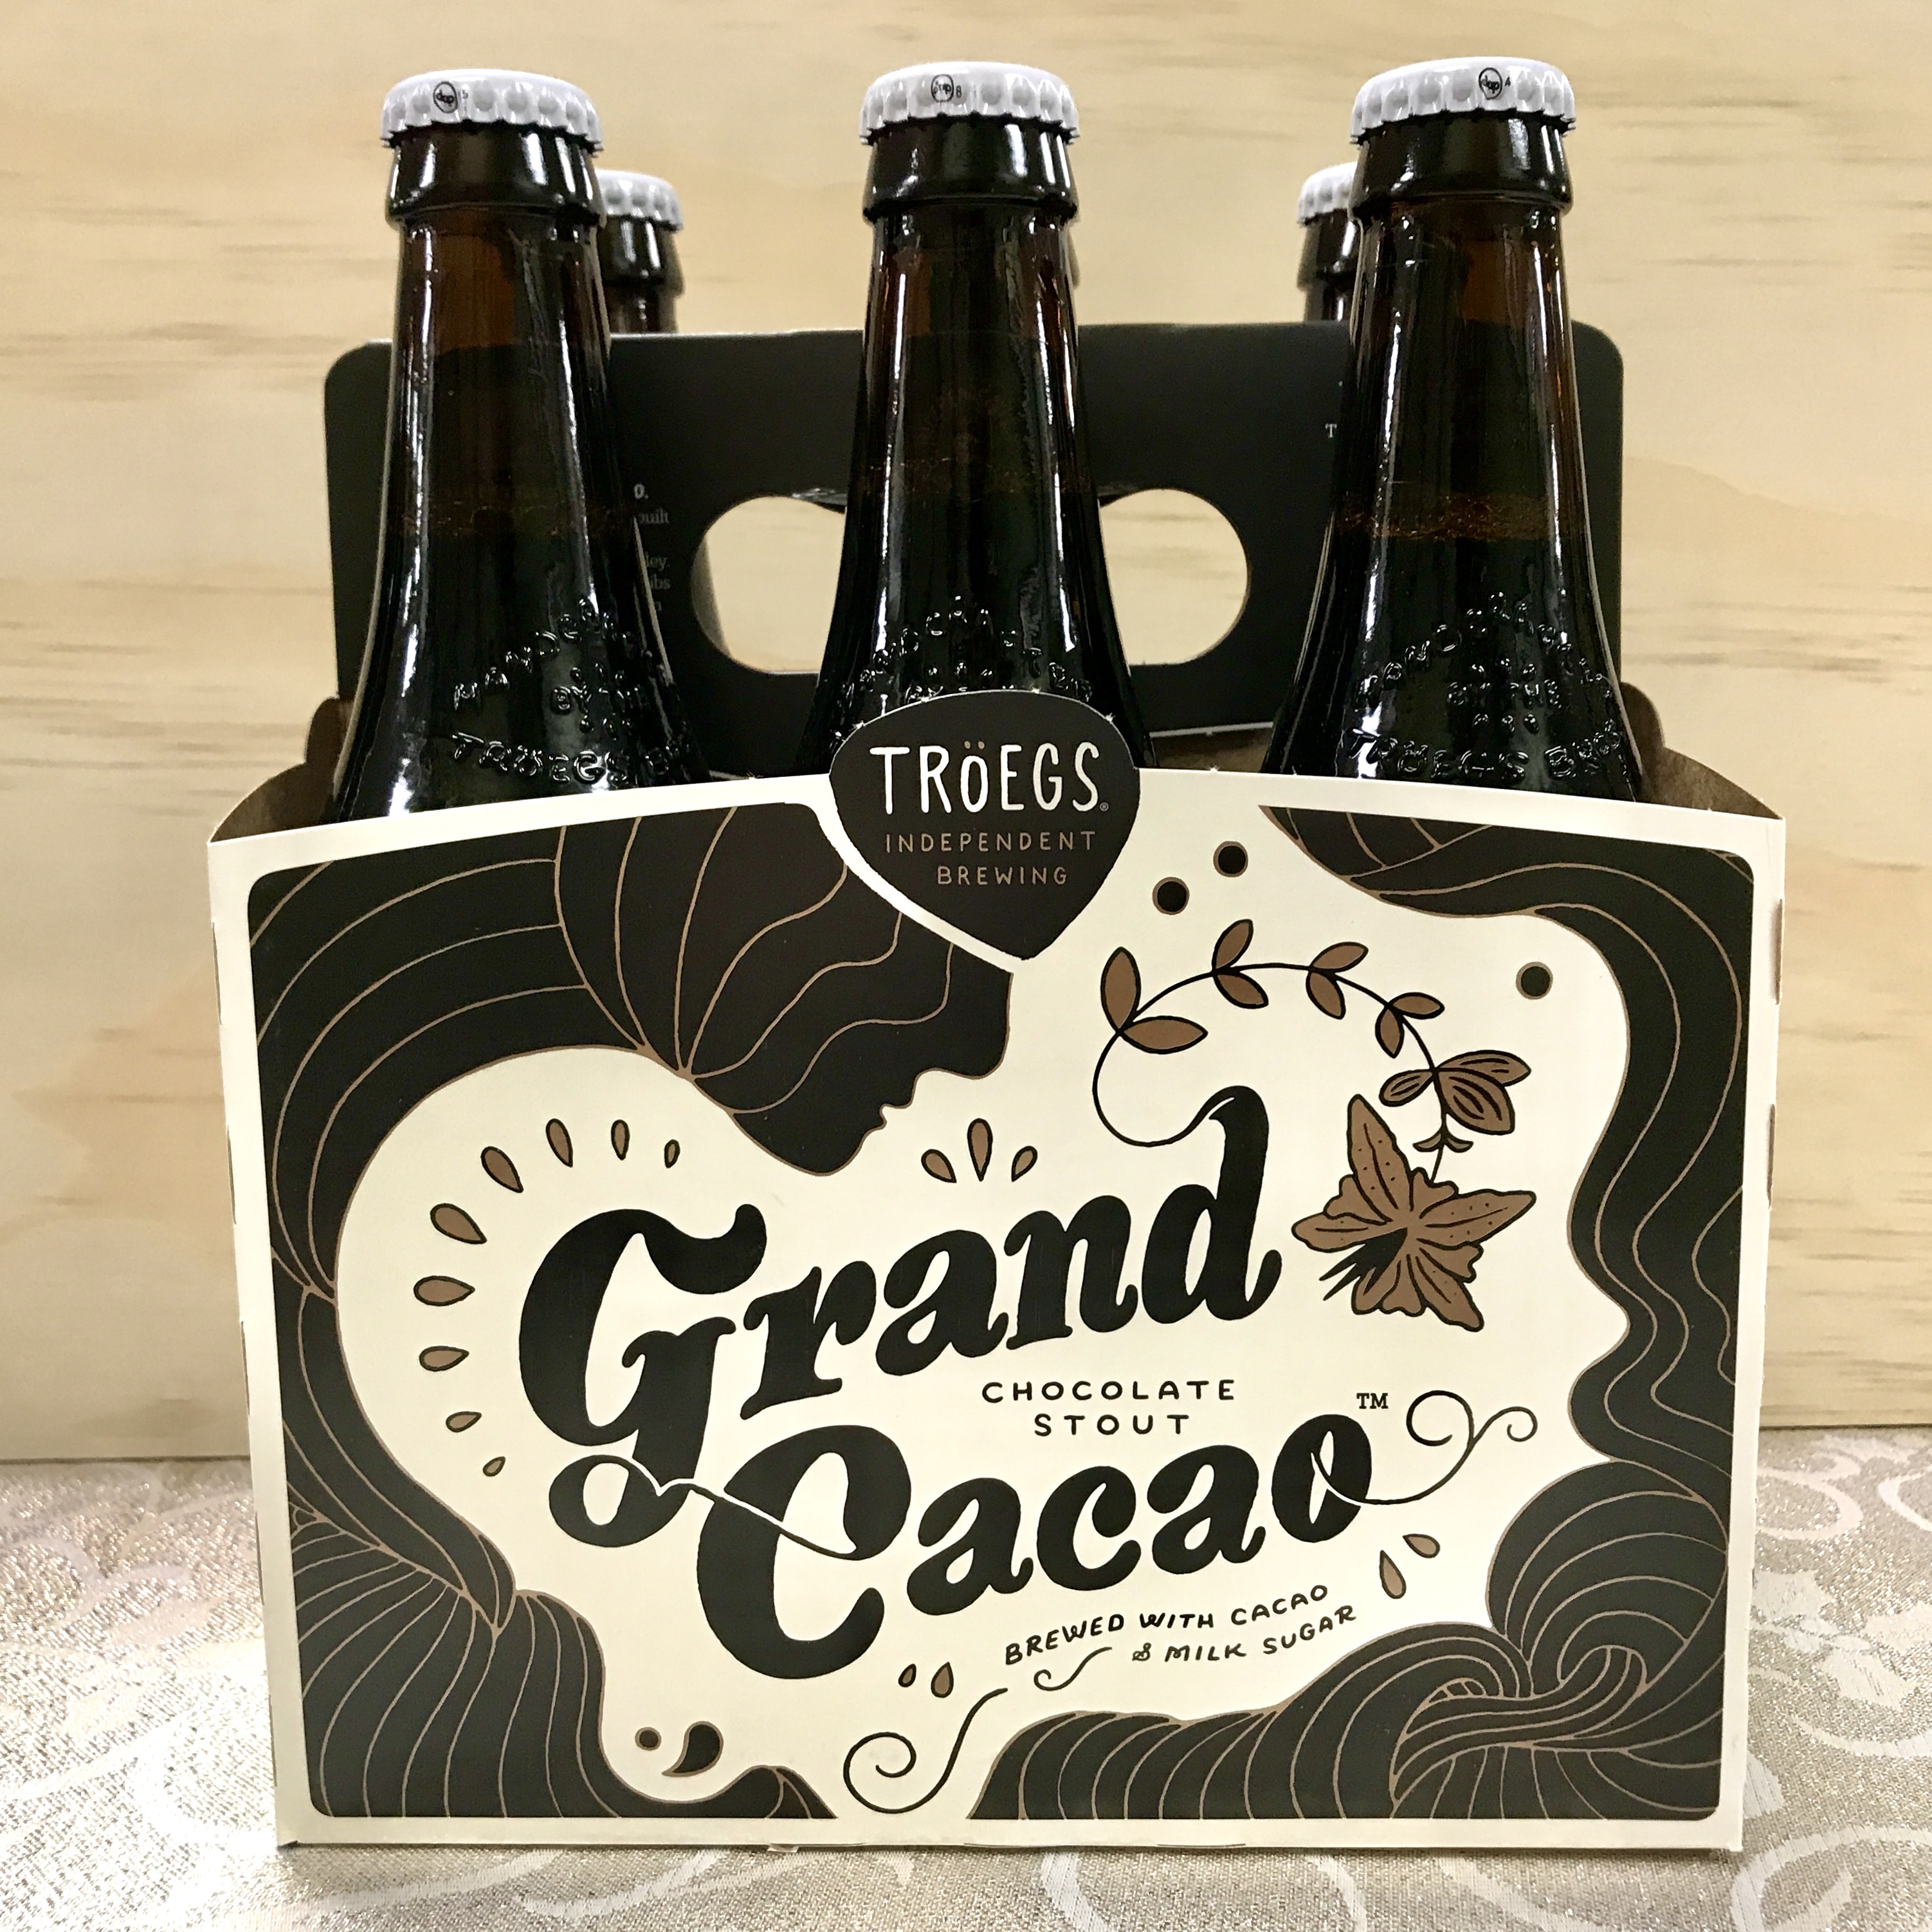 Troegs Grand Cacao Chocolate Stout 6 x 12 oz bottles